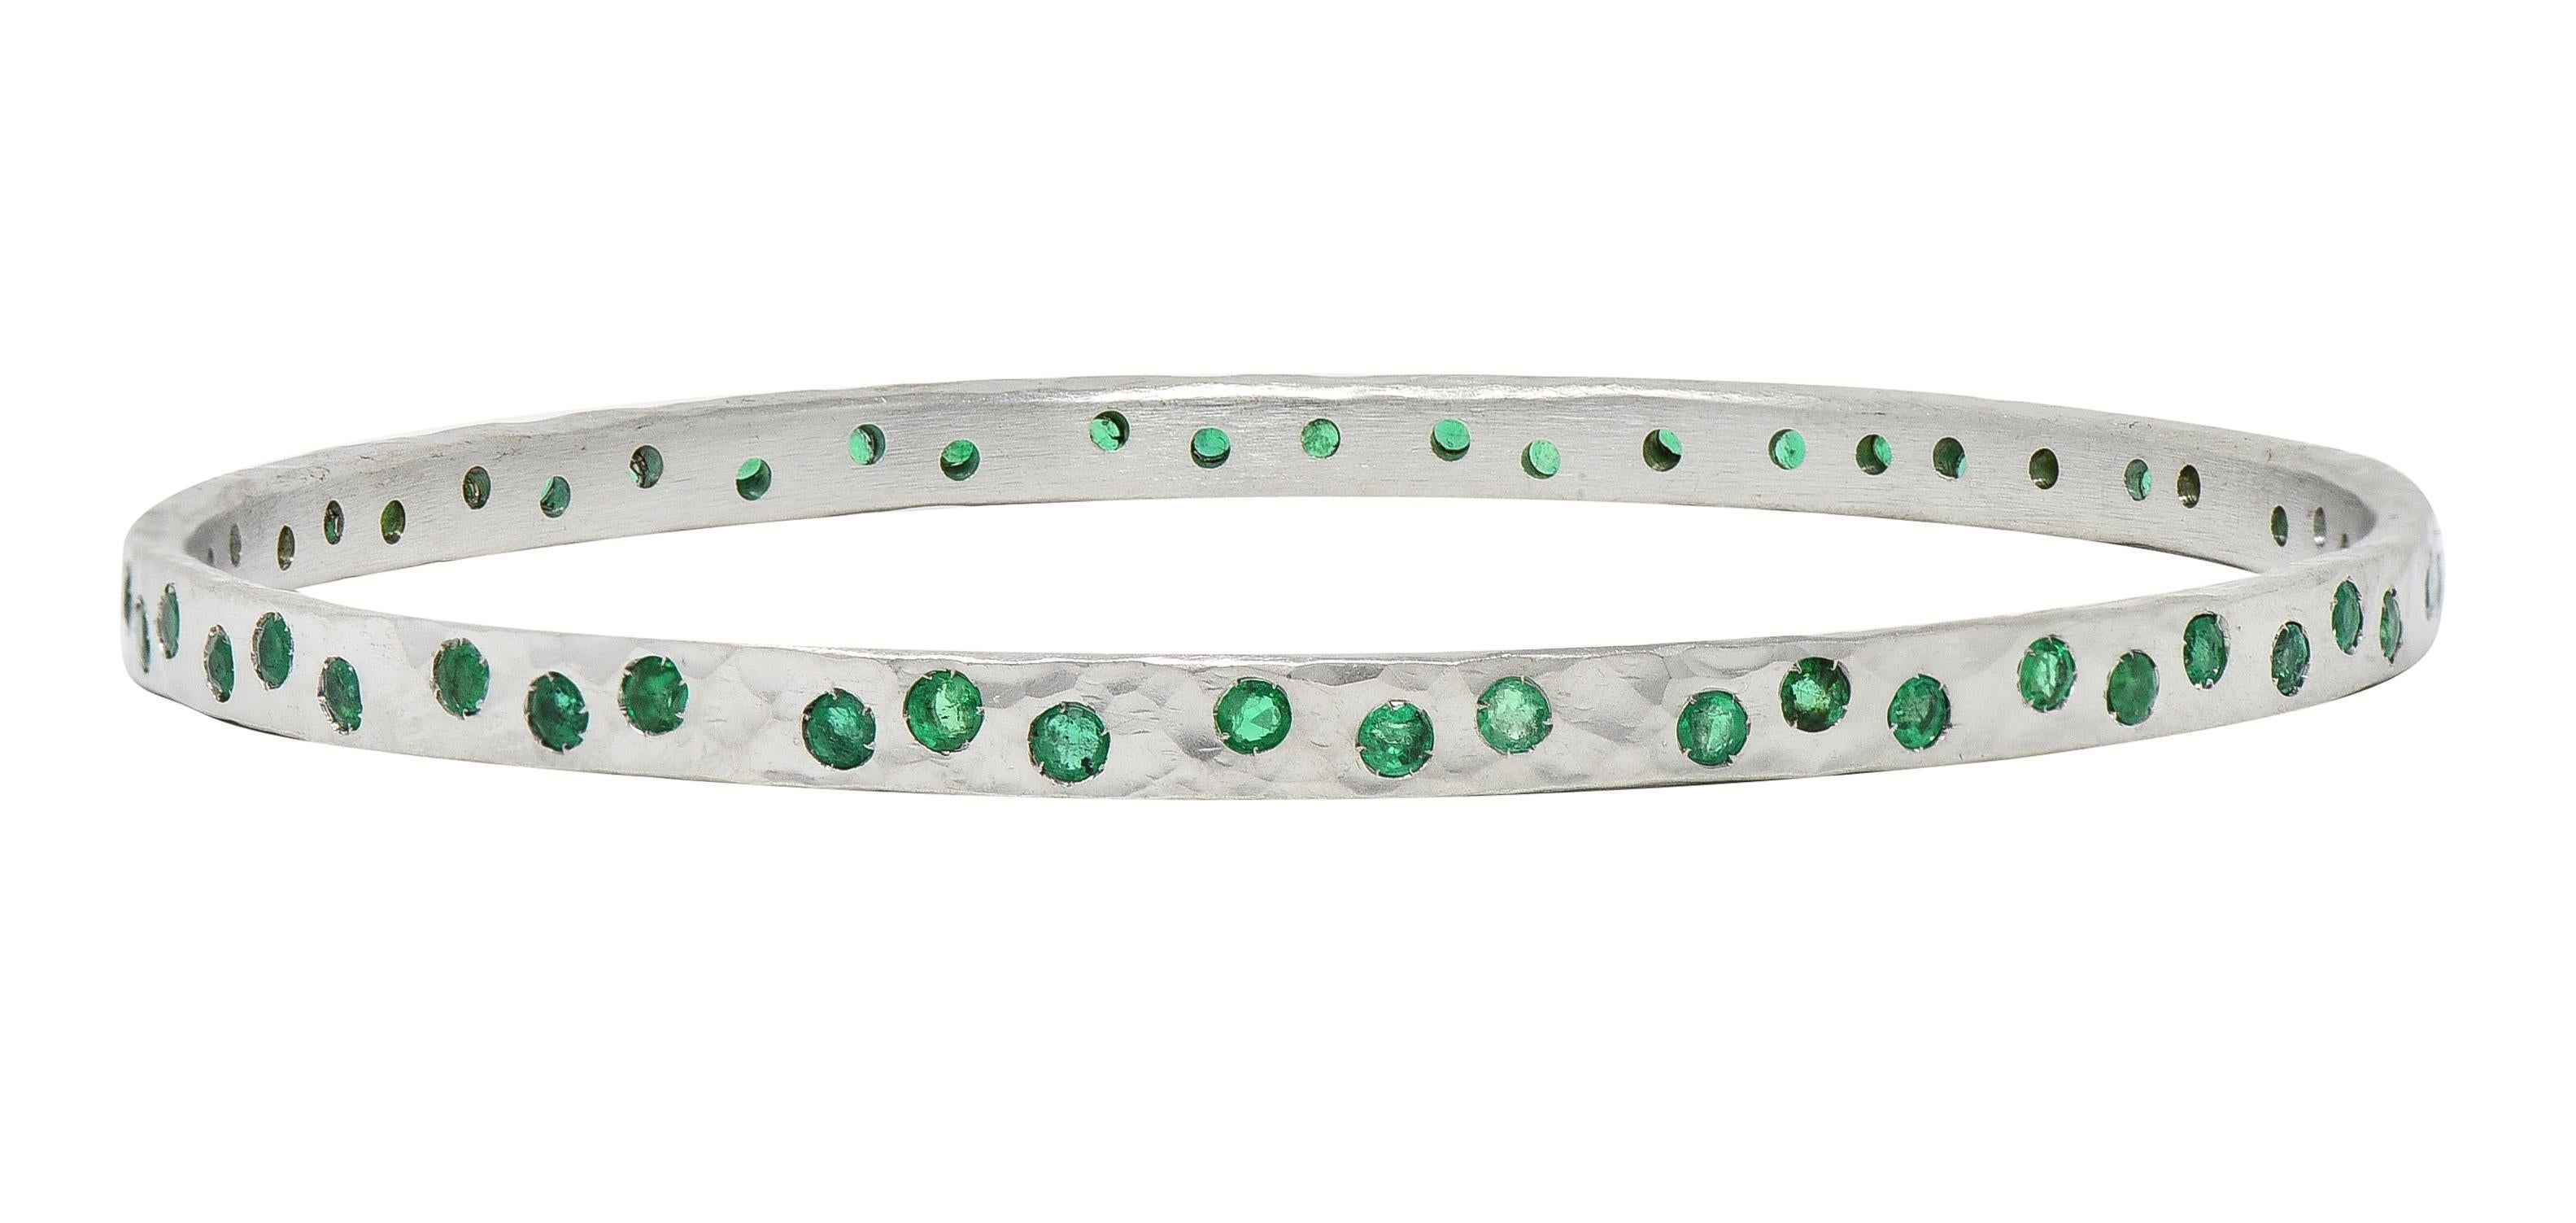 Designed as a white gold bangle with hammered texture throughout 
Featuring round cut emeralds flush set fully around 
Weighing approximately 2.70 carats total 
Transparent light to medium green 
Stamped for 14 karat gold
With maker's mark
Circa: